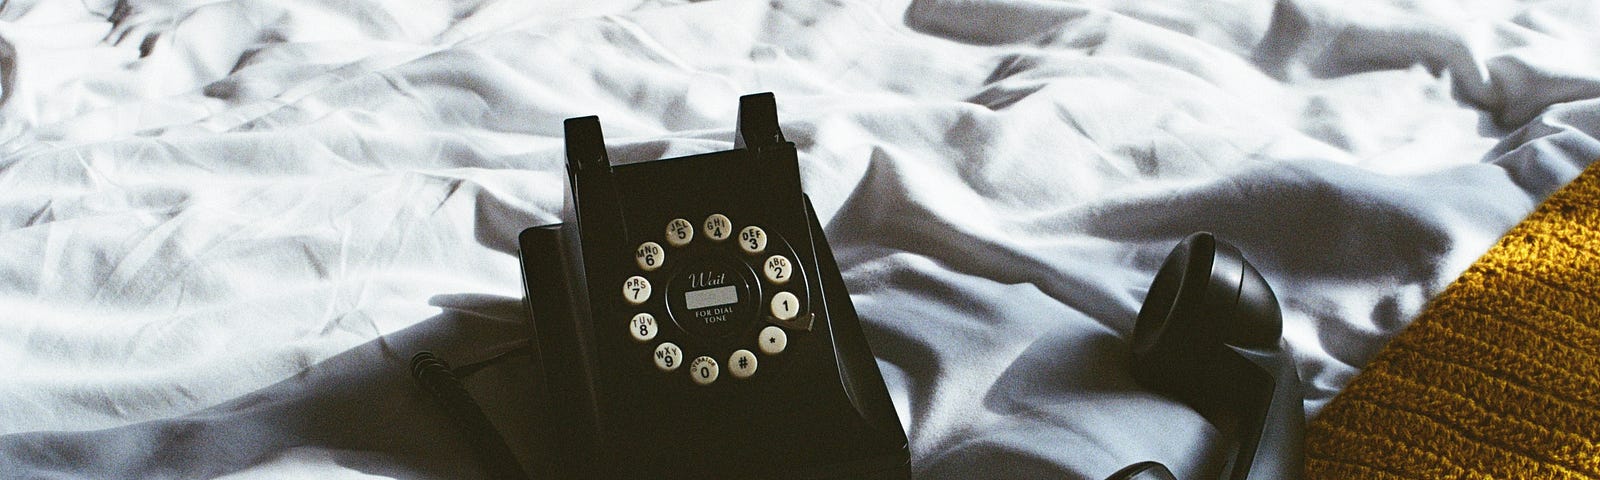 A black dial phone sitting on a bed with the receiver unhooked